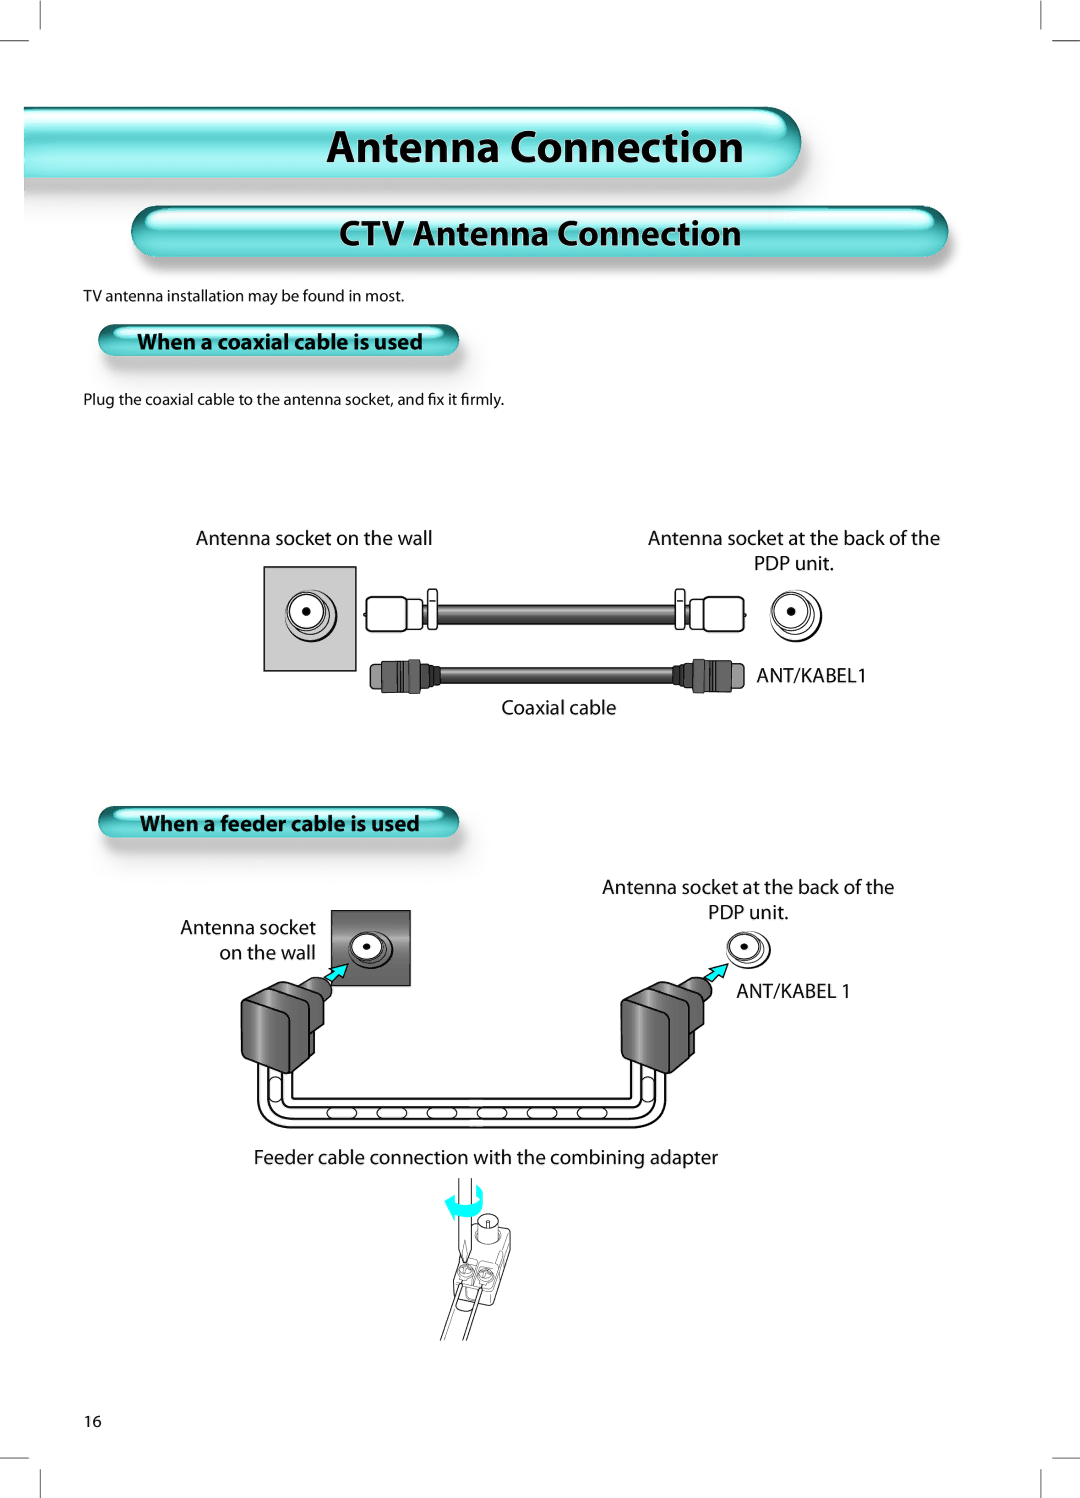 Daewoo DT-42A1 user manual CTV Antenna Connection, When a coaxial cable is used, When a feeder cable is used 